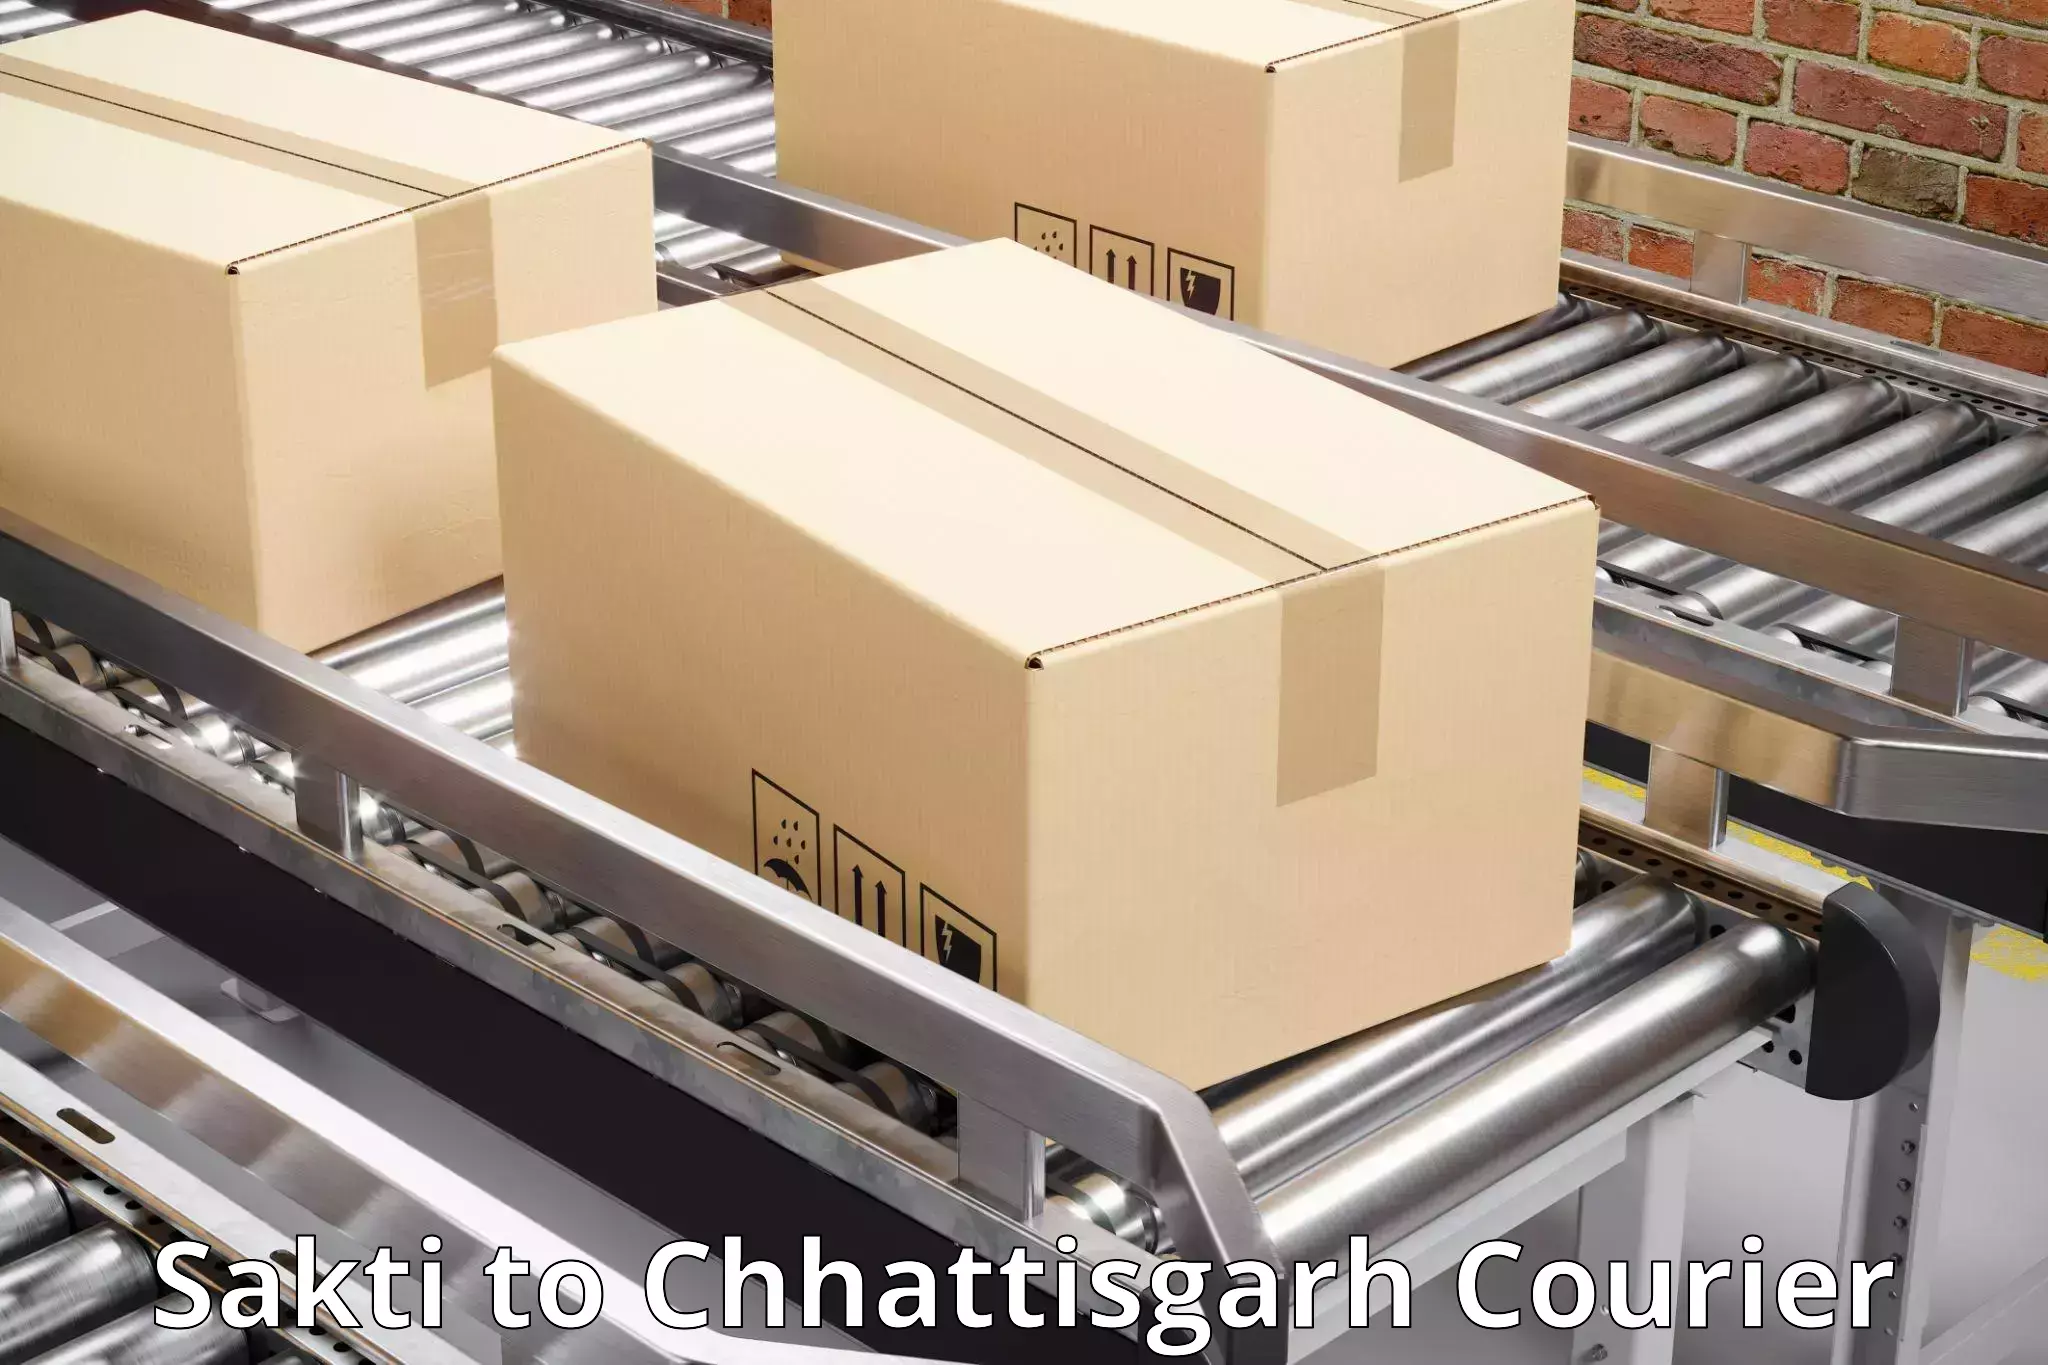 Delivery service partnership Sakti to Abhanpur